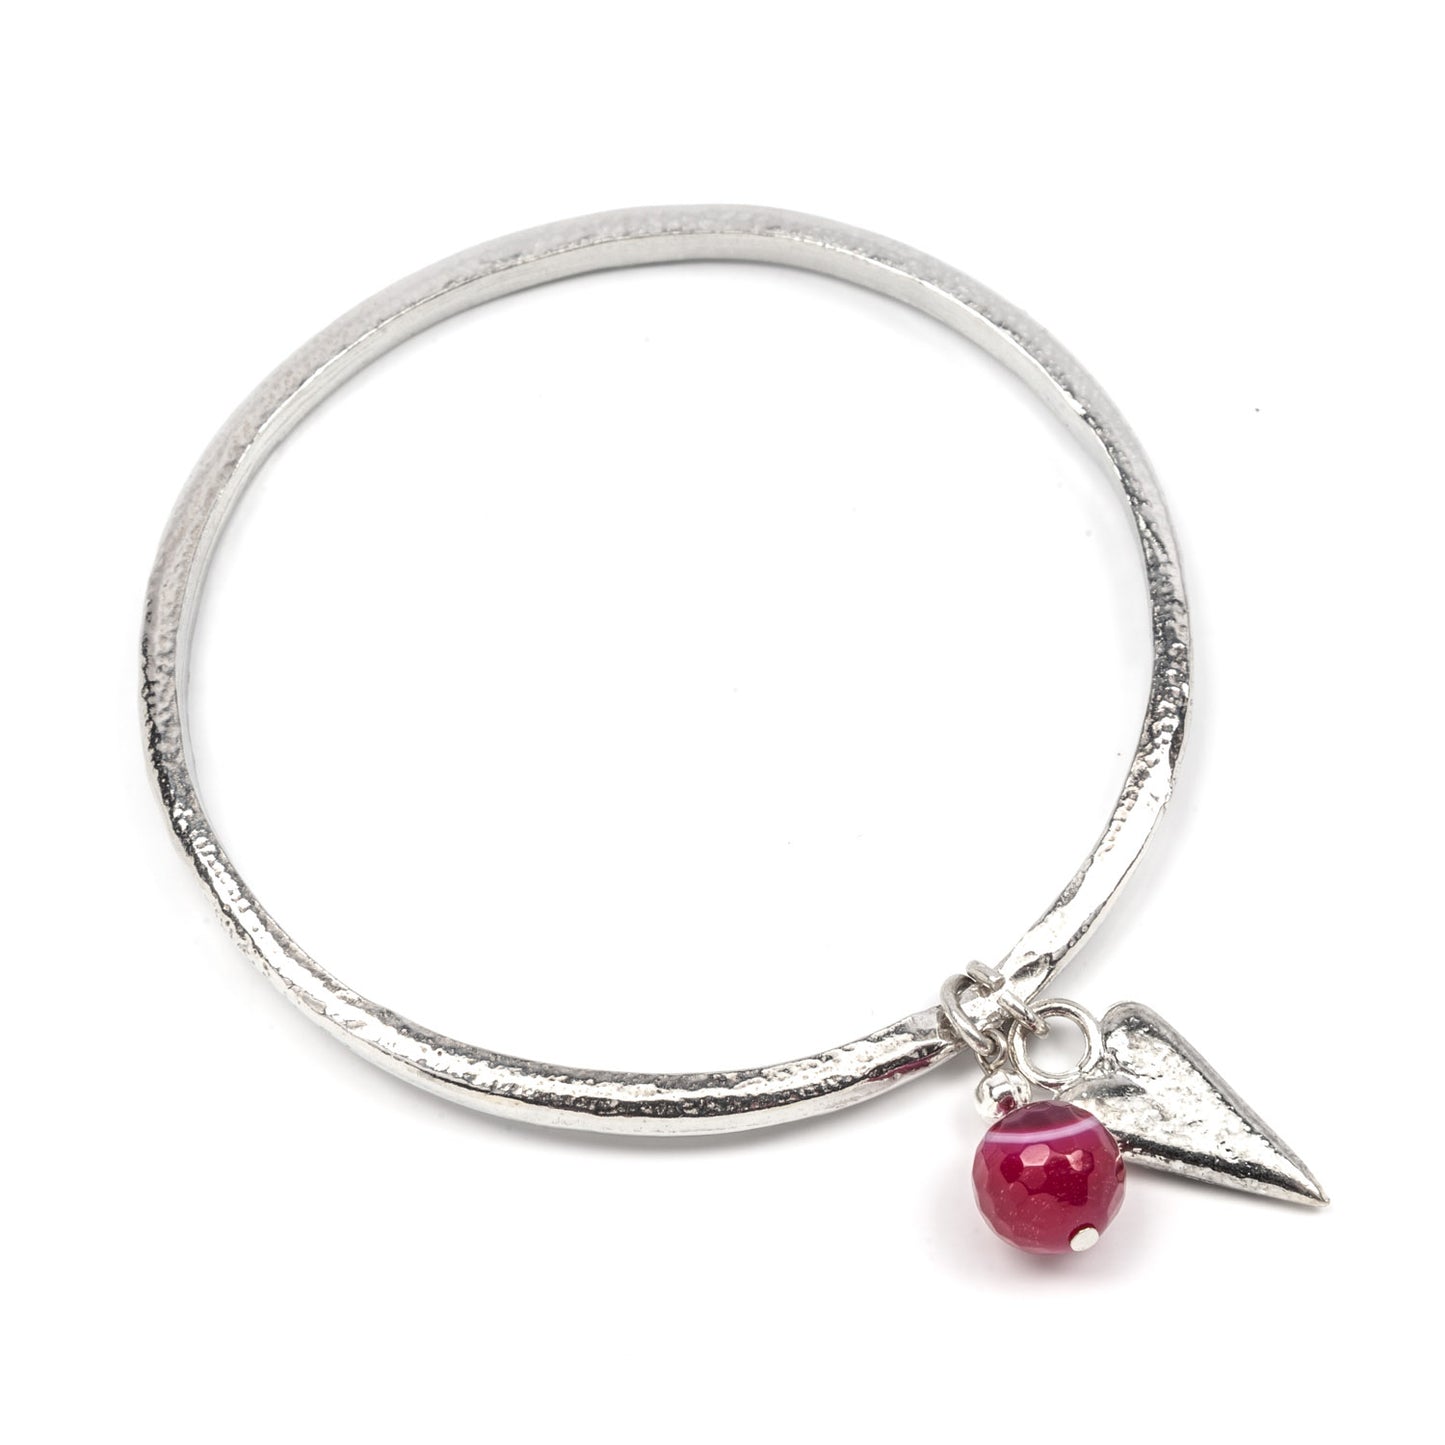 A gorgeous range of pewter bangles with a splash of summer